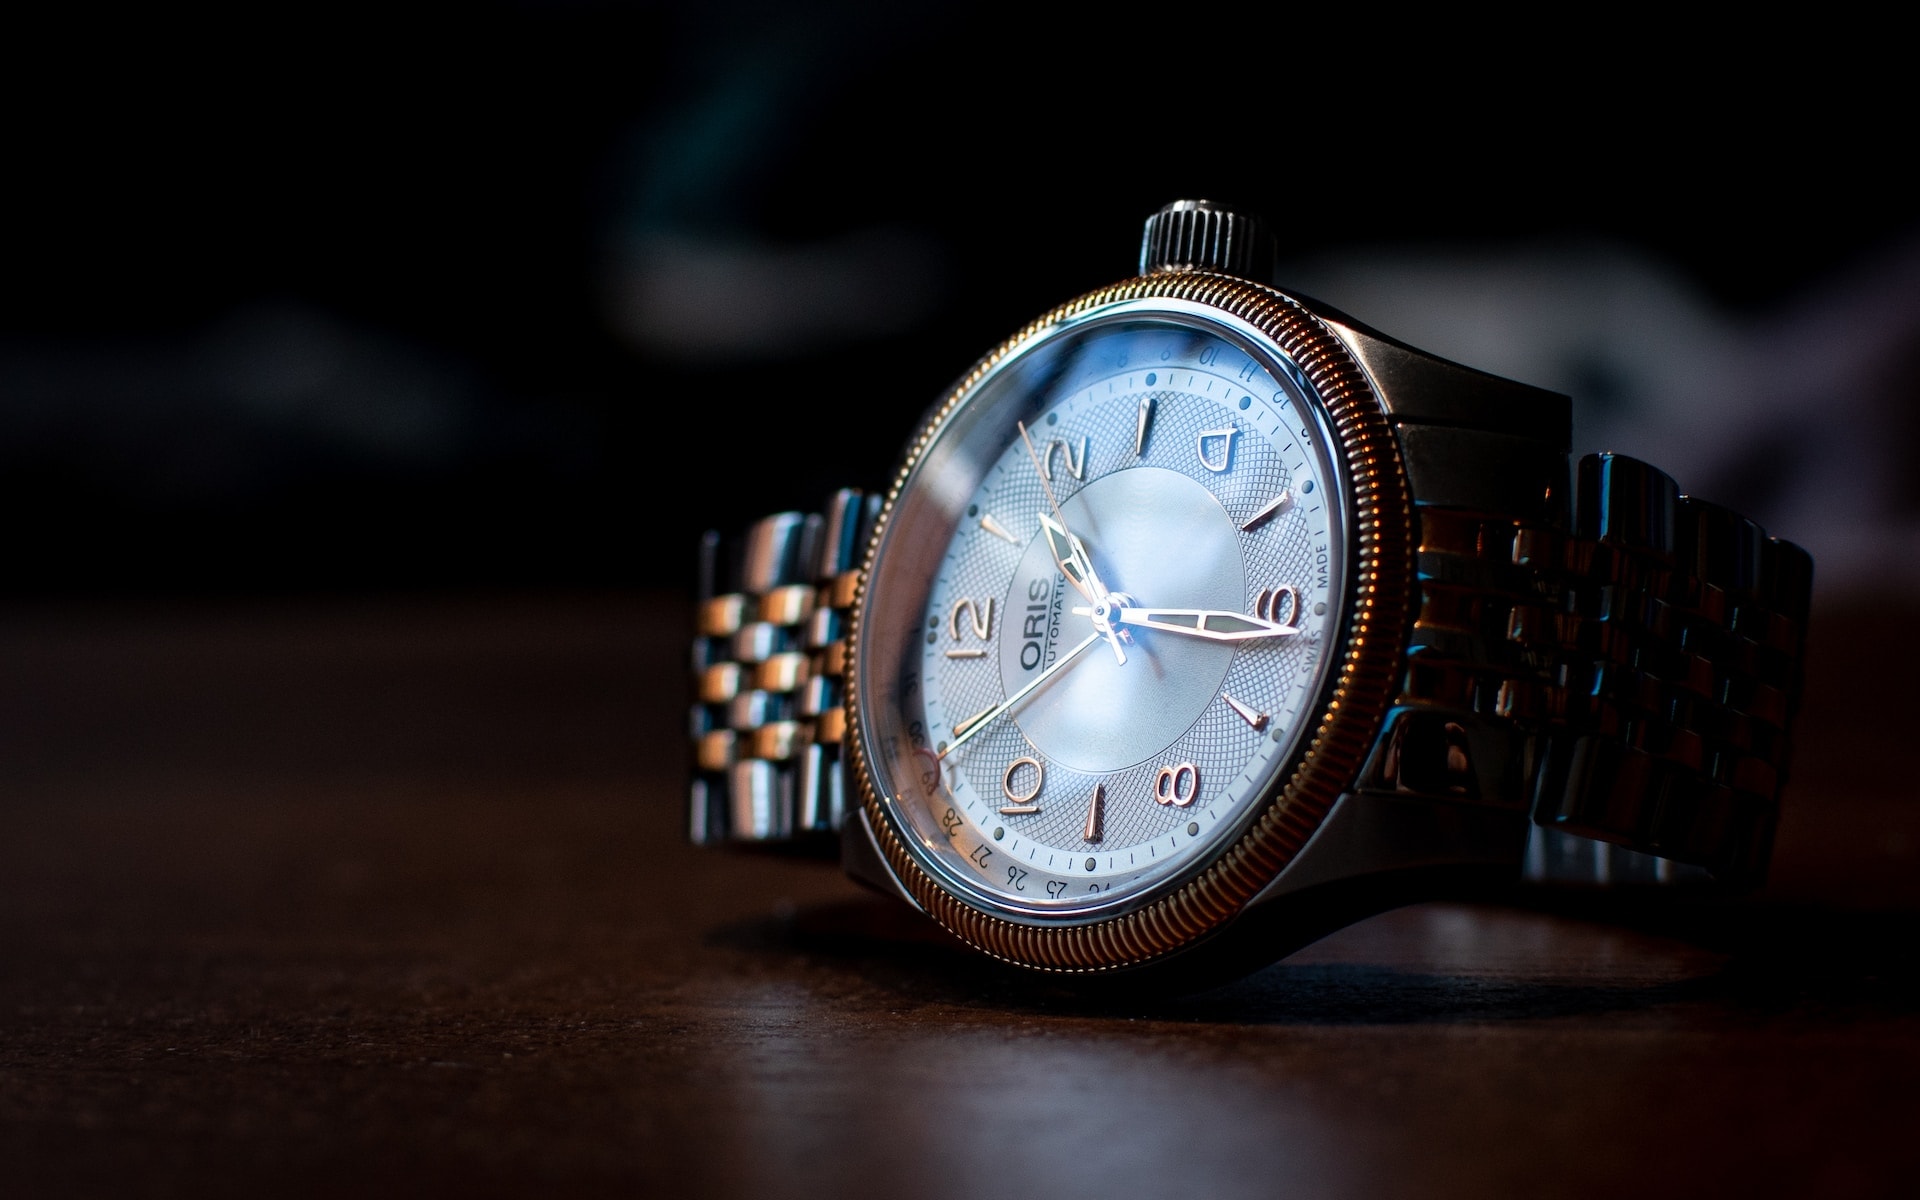 The Perfect Timepiece: Essential Features of an International Wristwatch and Jewelry Brand